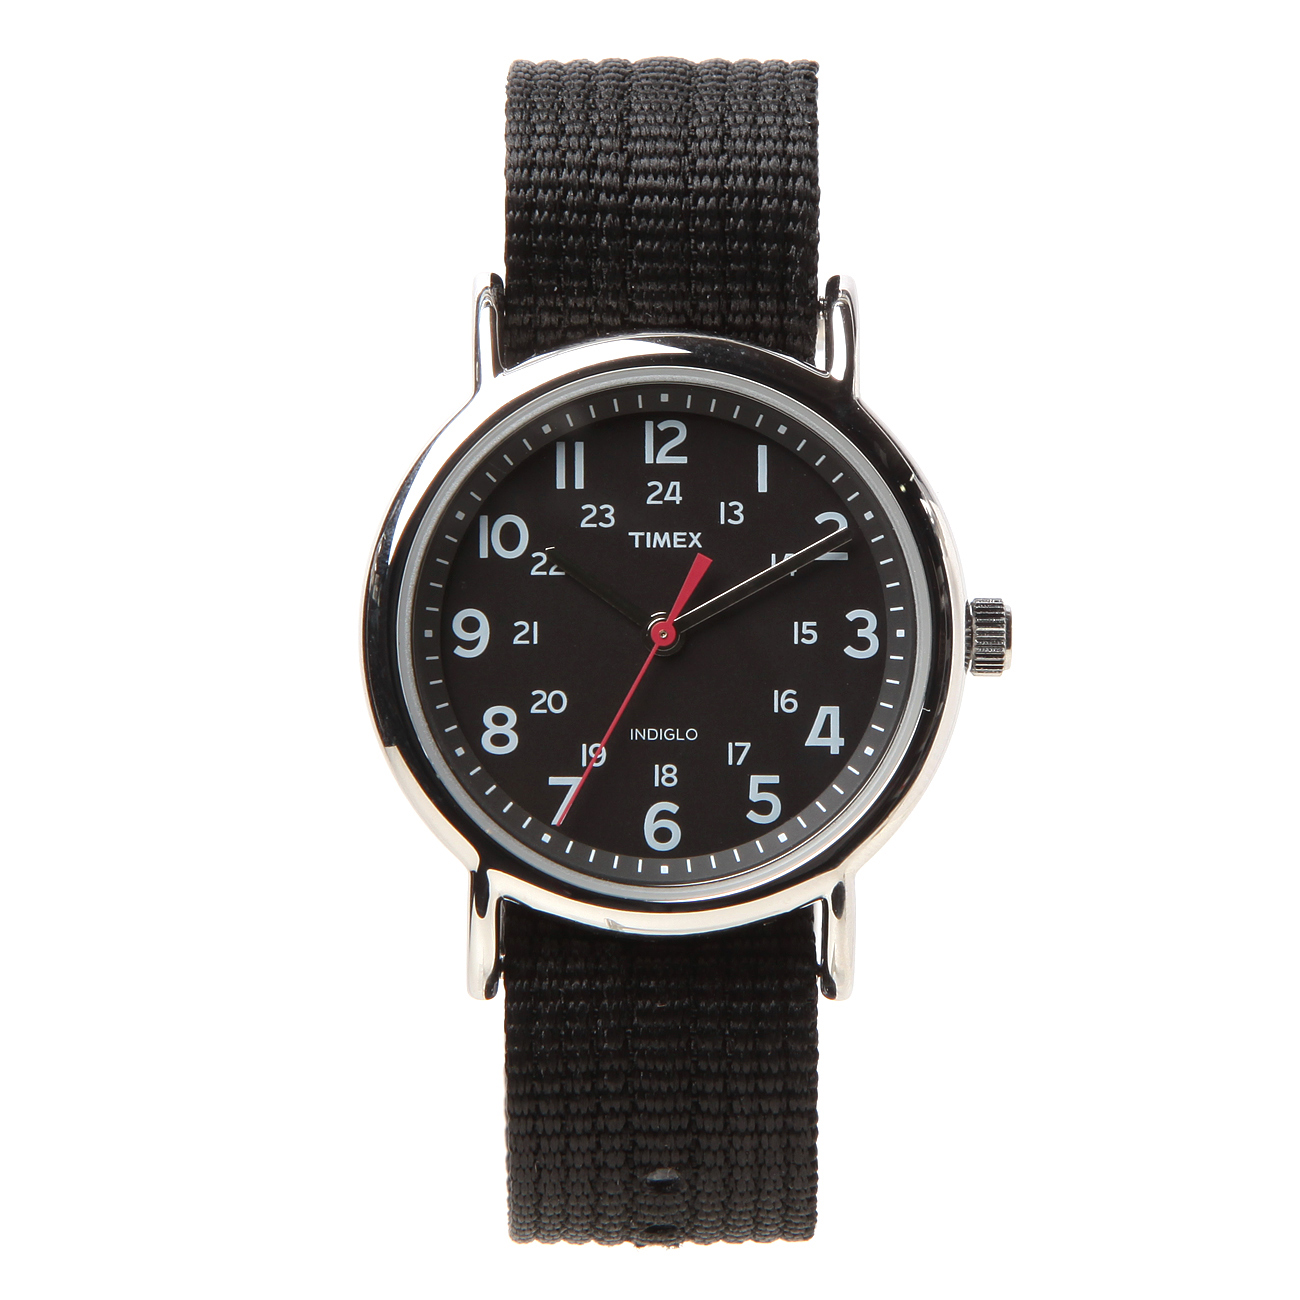 Timex タイメックス Weekender Central Park Black 通販 正規取扱店 Collect Store コレクトストア